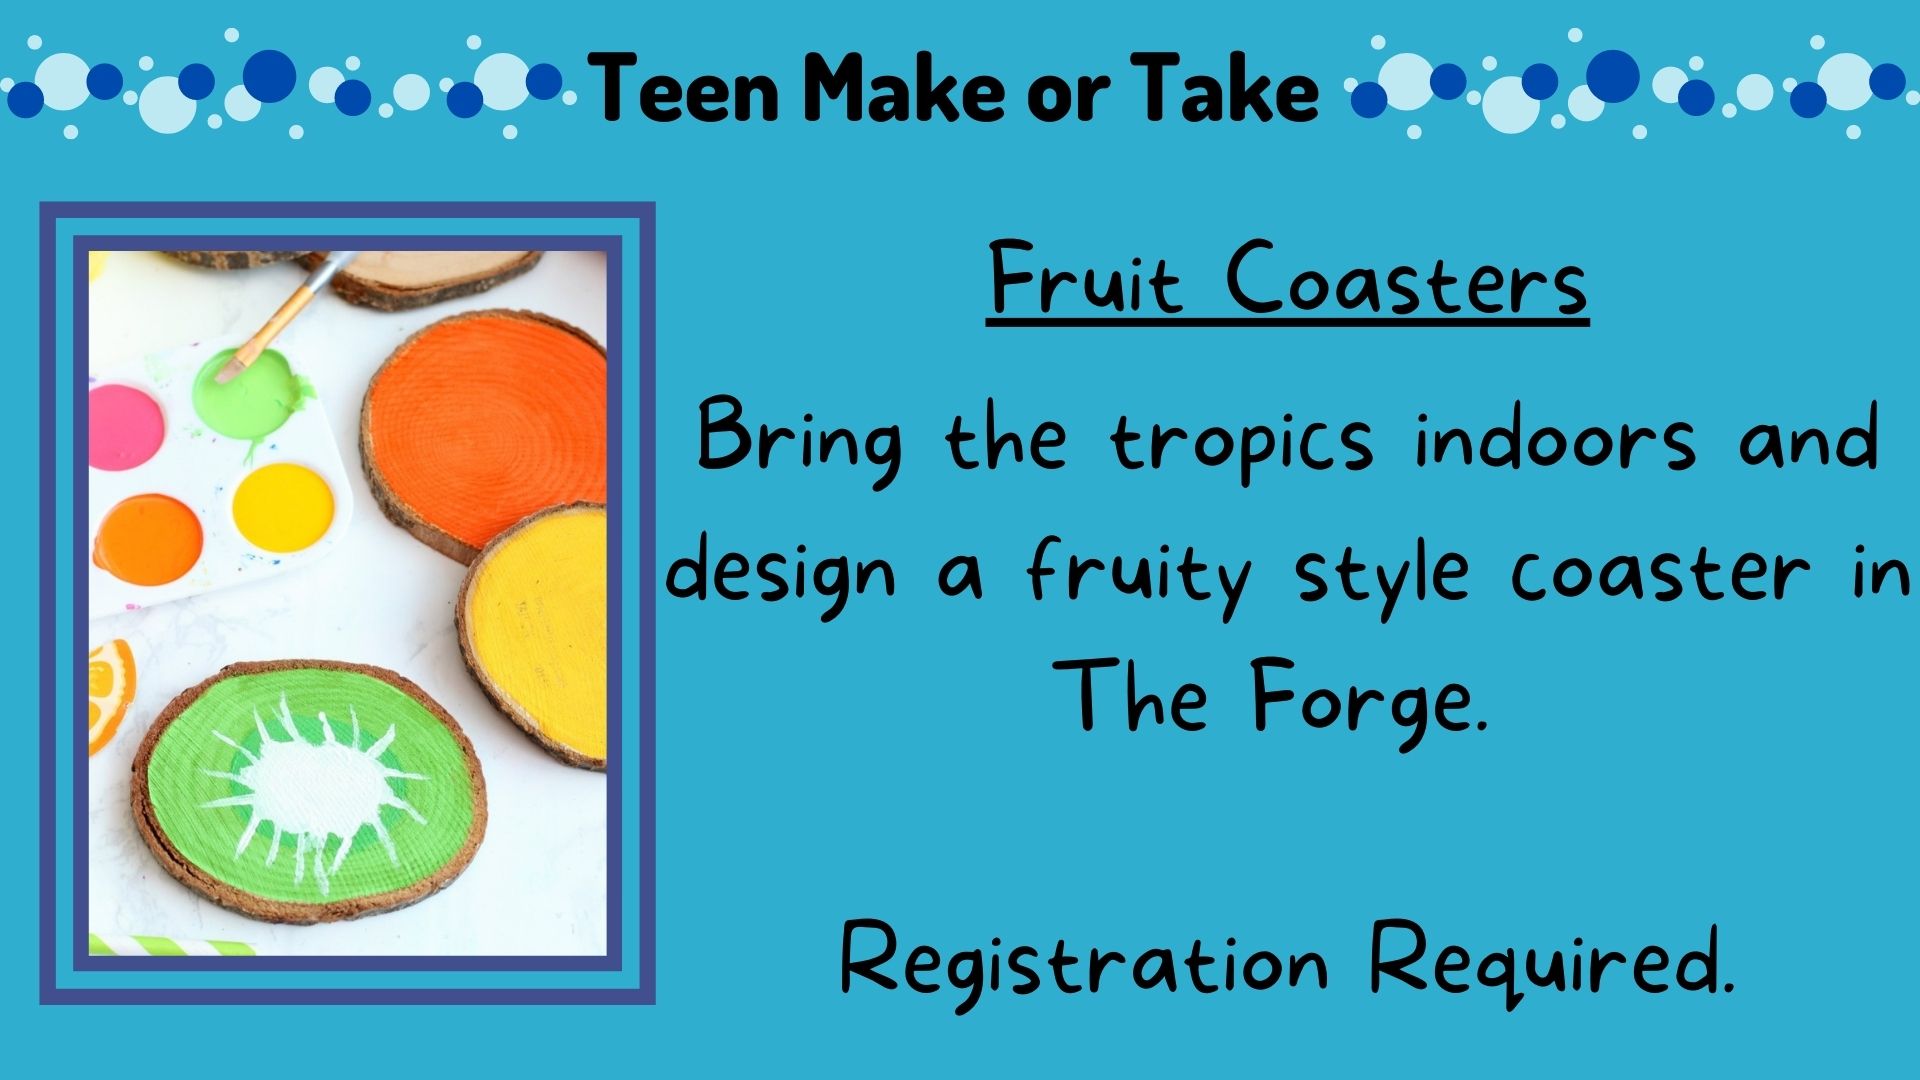 Flyer for Teen Make or Take Fruit Coasters